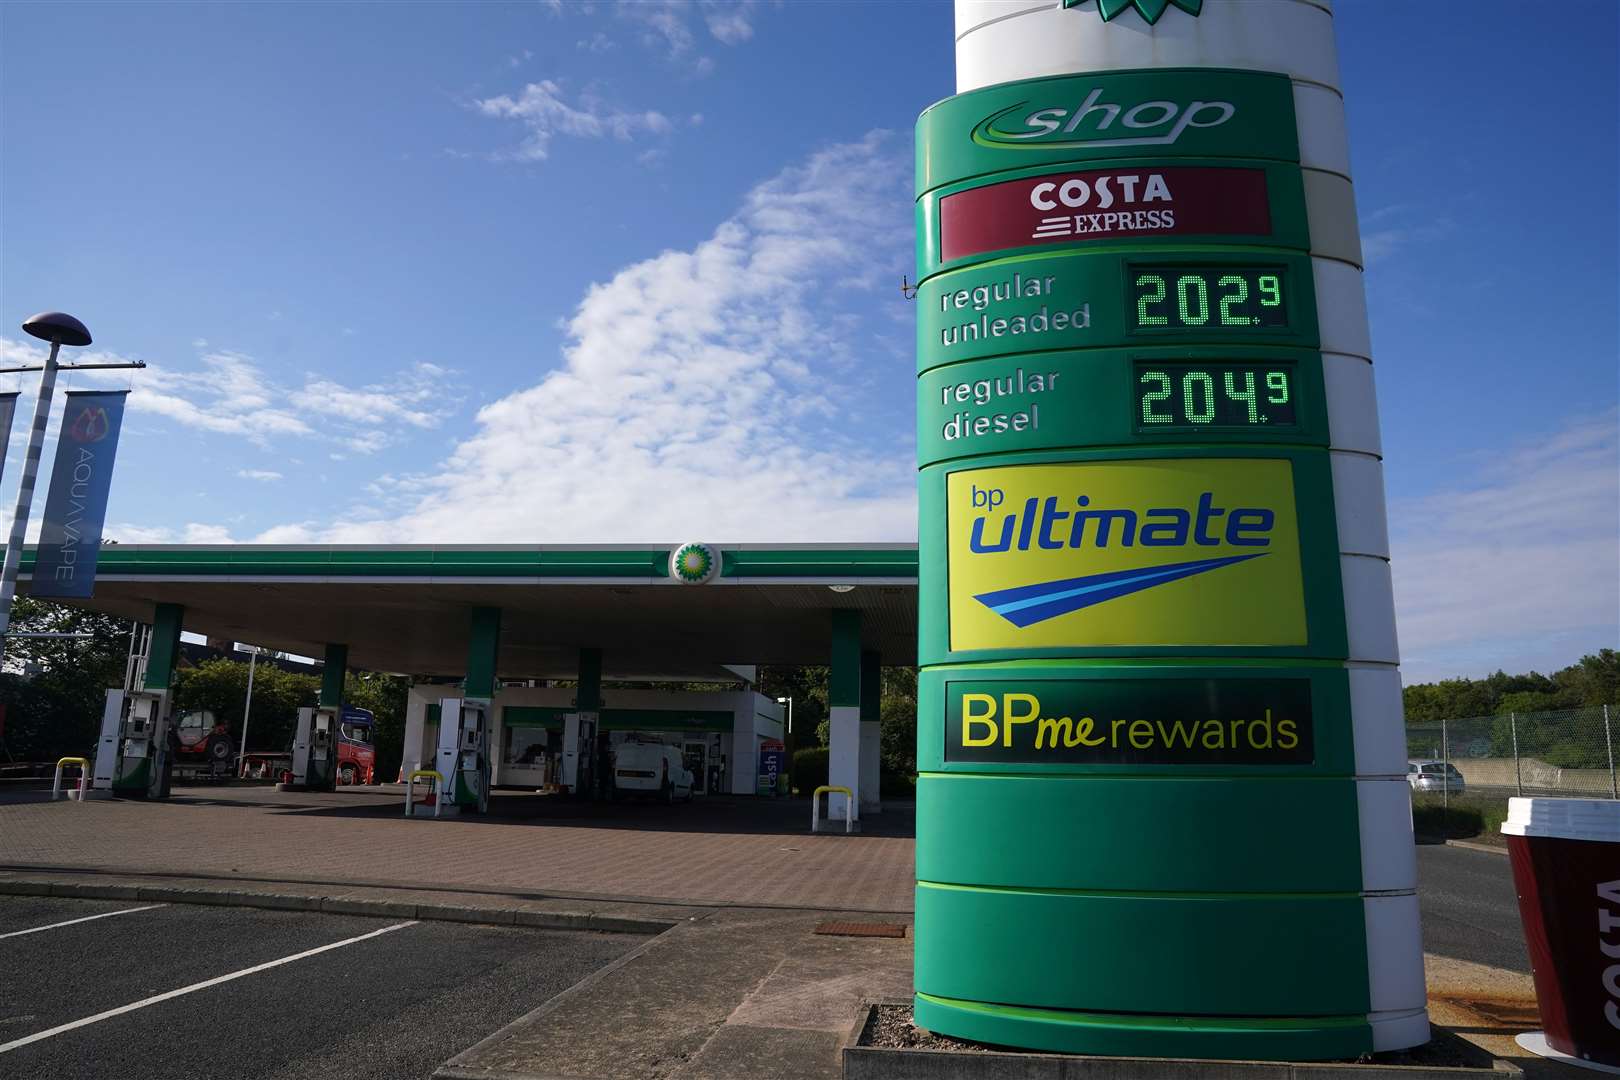 Fuel prices have already hit more than £2 a litre at a BP garage on the A1, Tyne and Wear (PA)